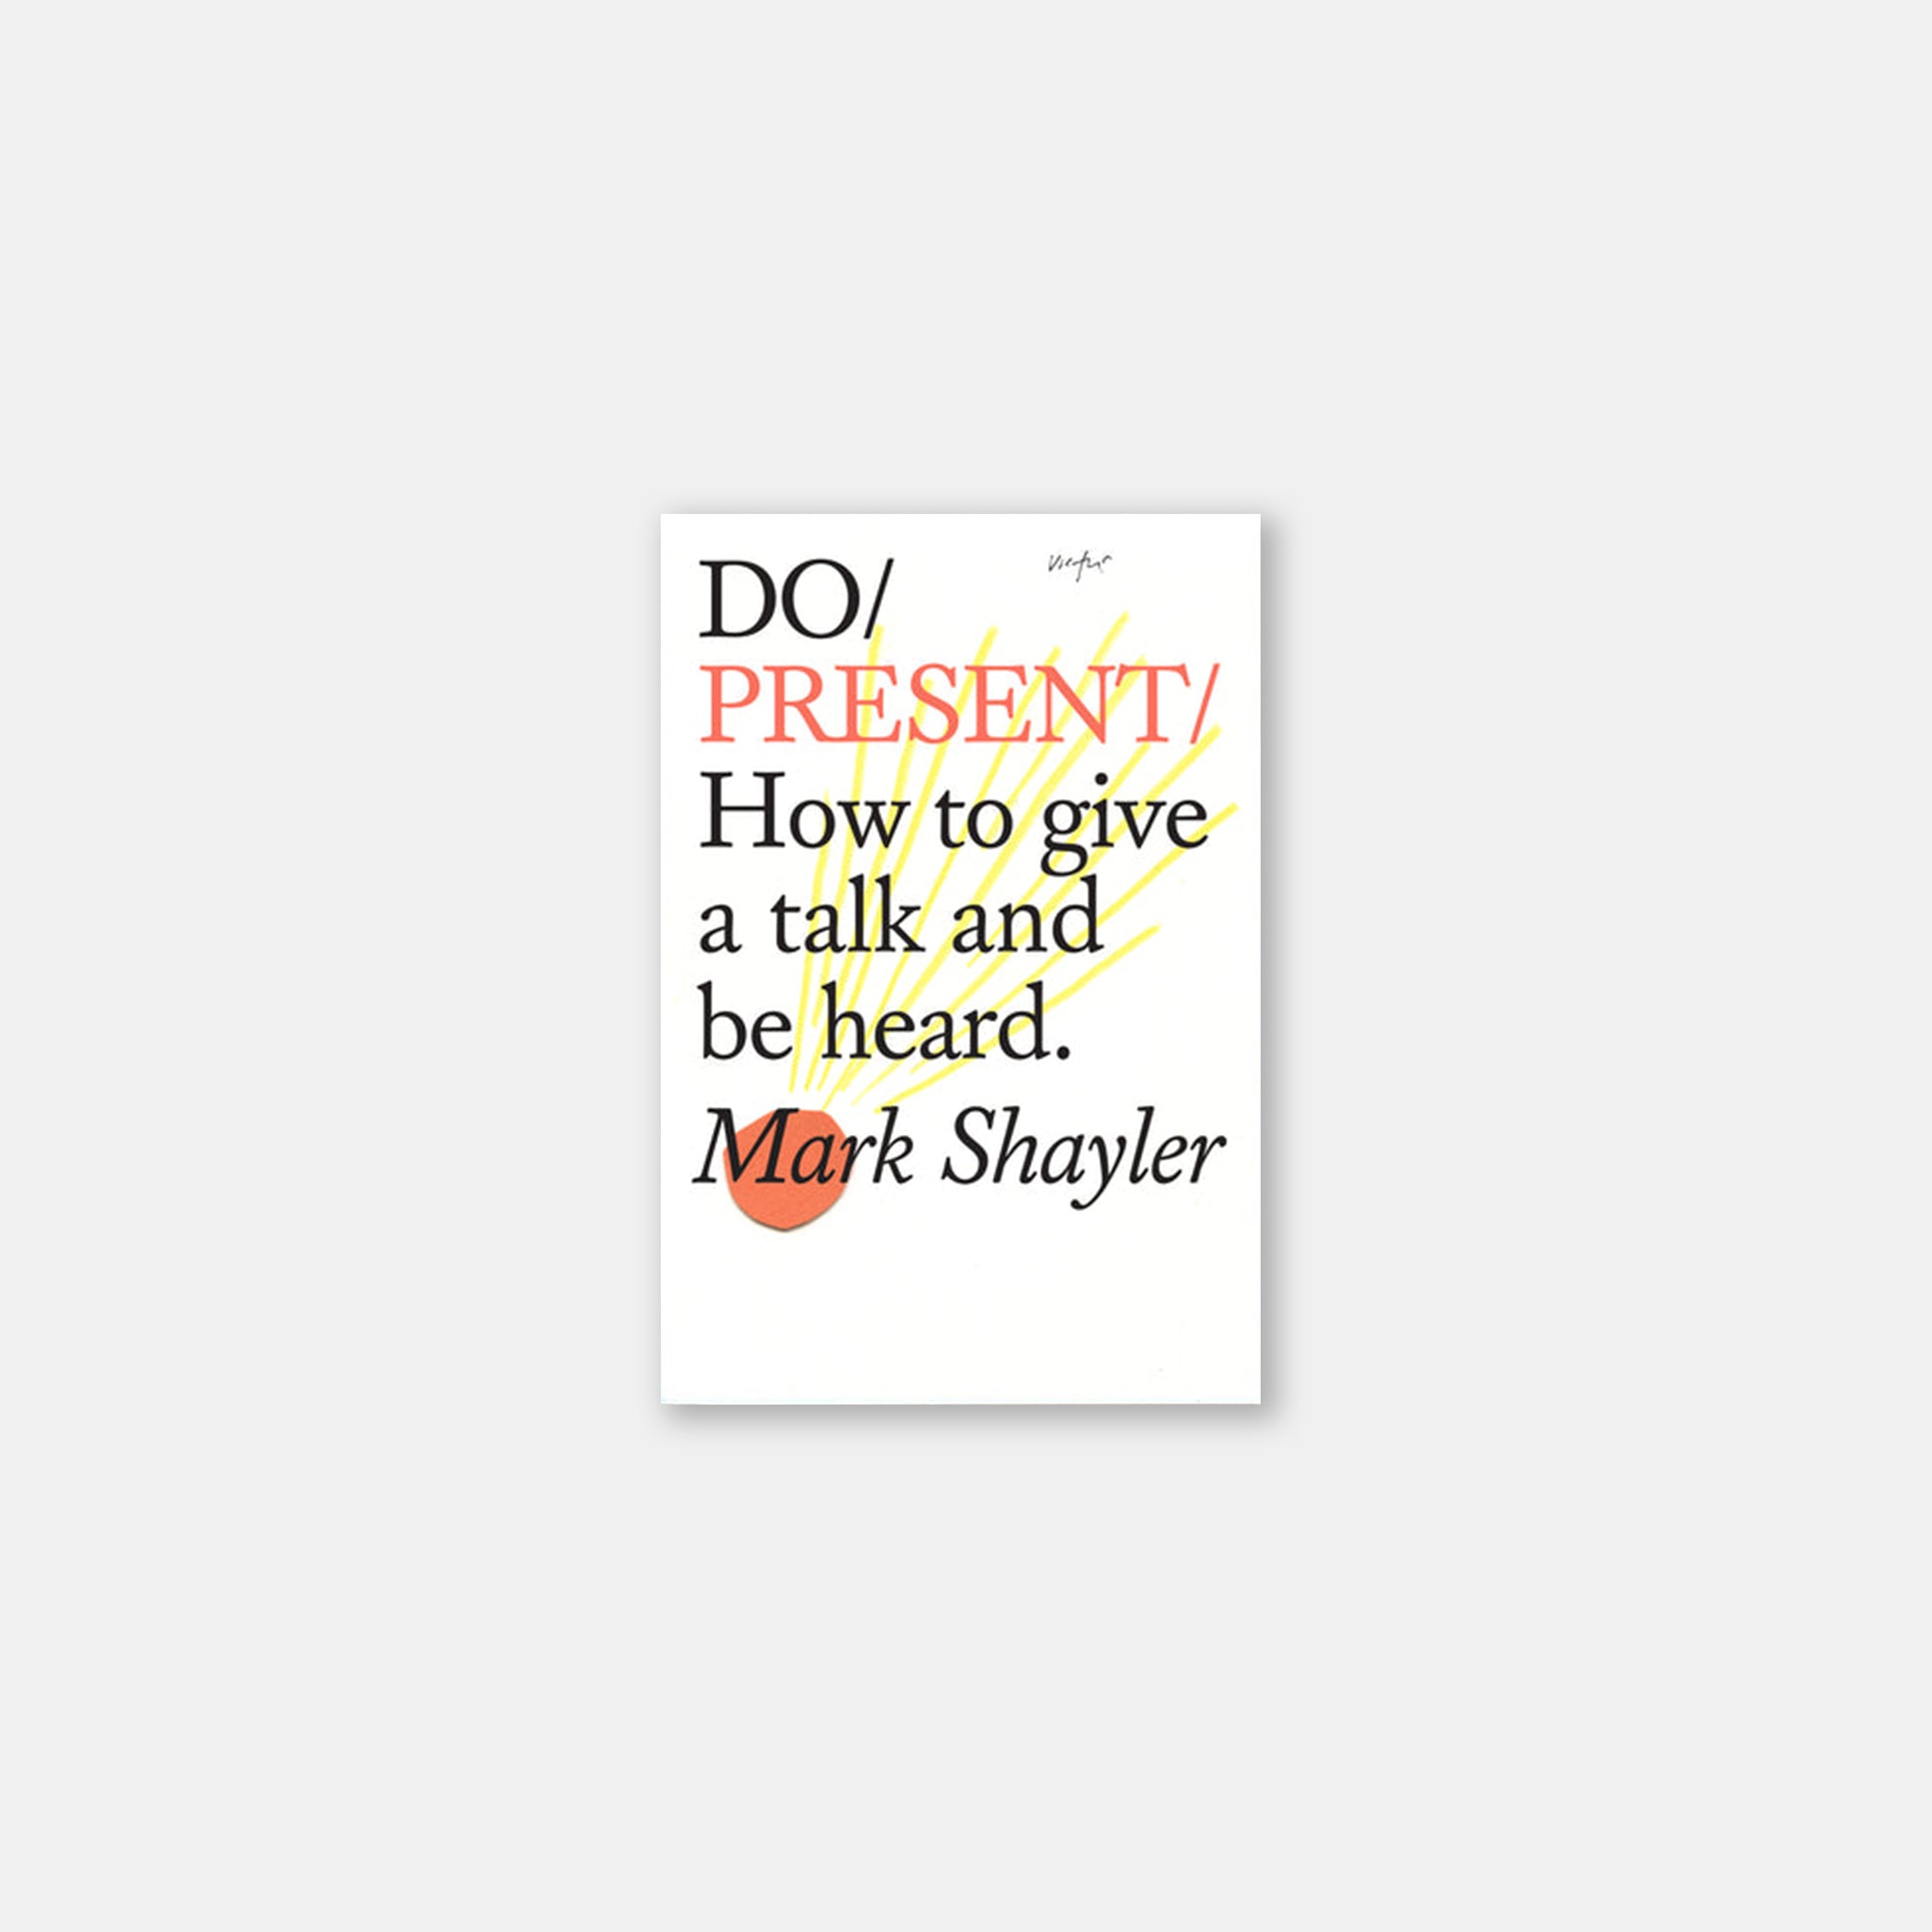 Do Present - How to give a talk and be heard